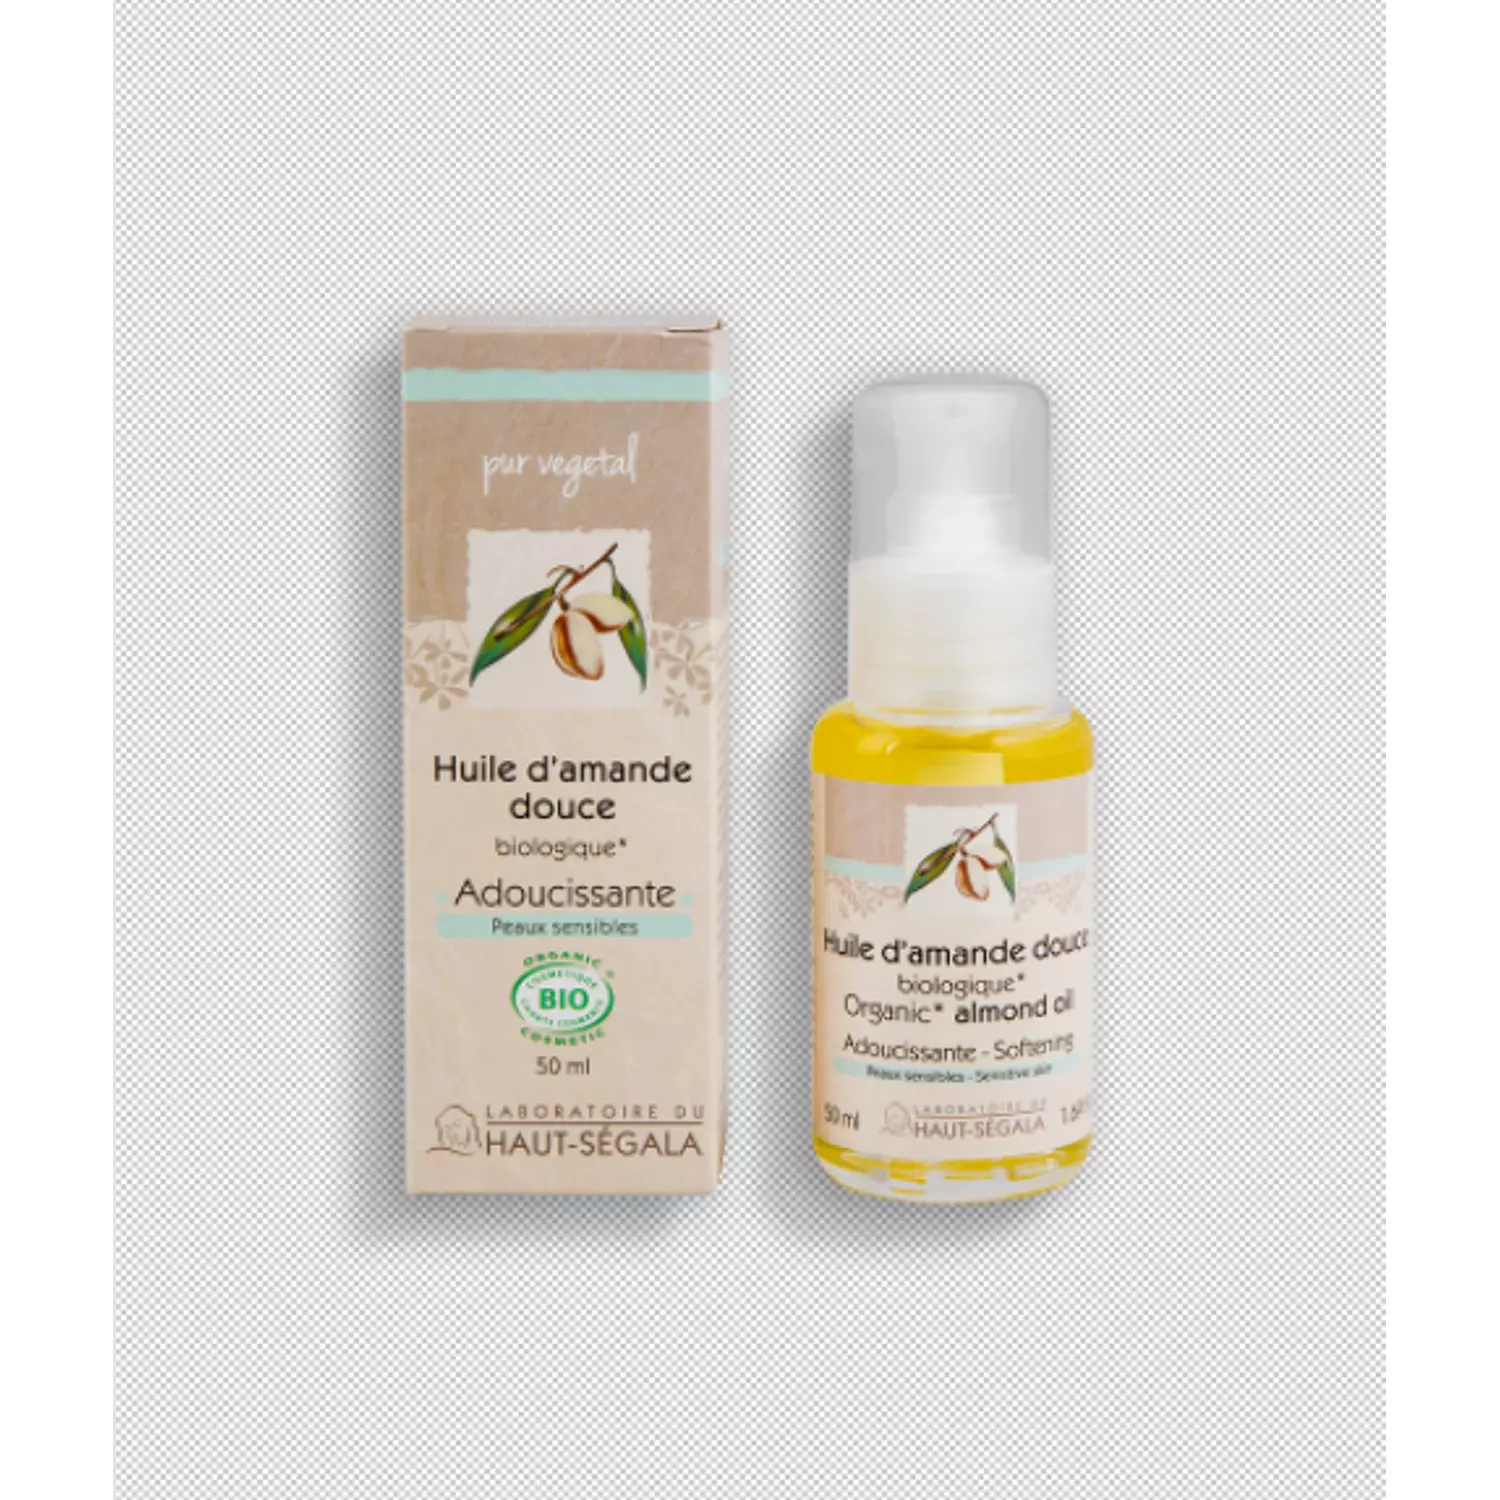 Organic Almond Oil  hover image